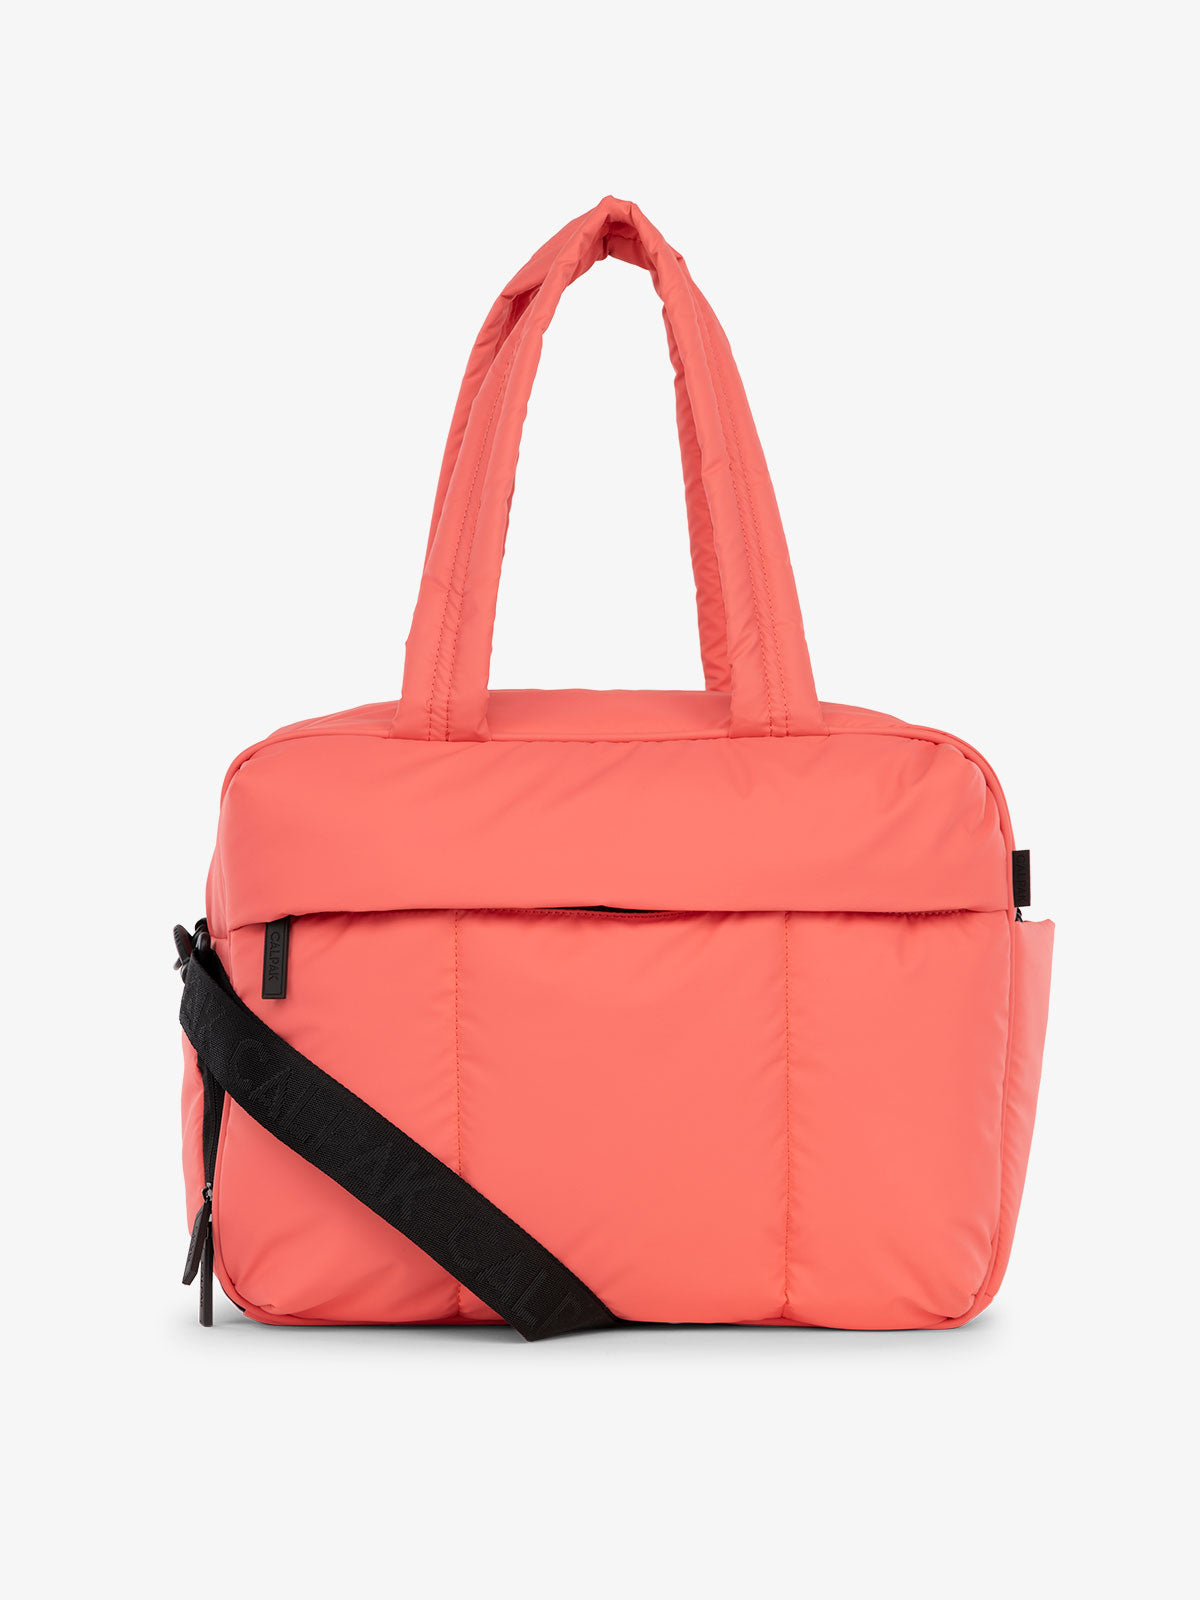 CALPAK Luka Duffel puffy Bag with detachable strap and zippered front pocket in watermelon